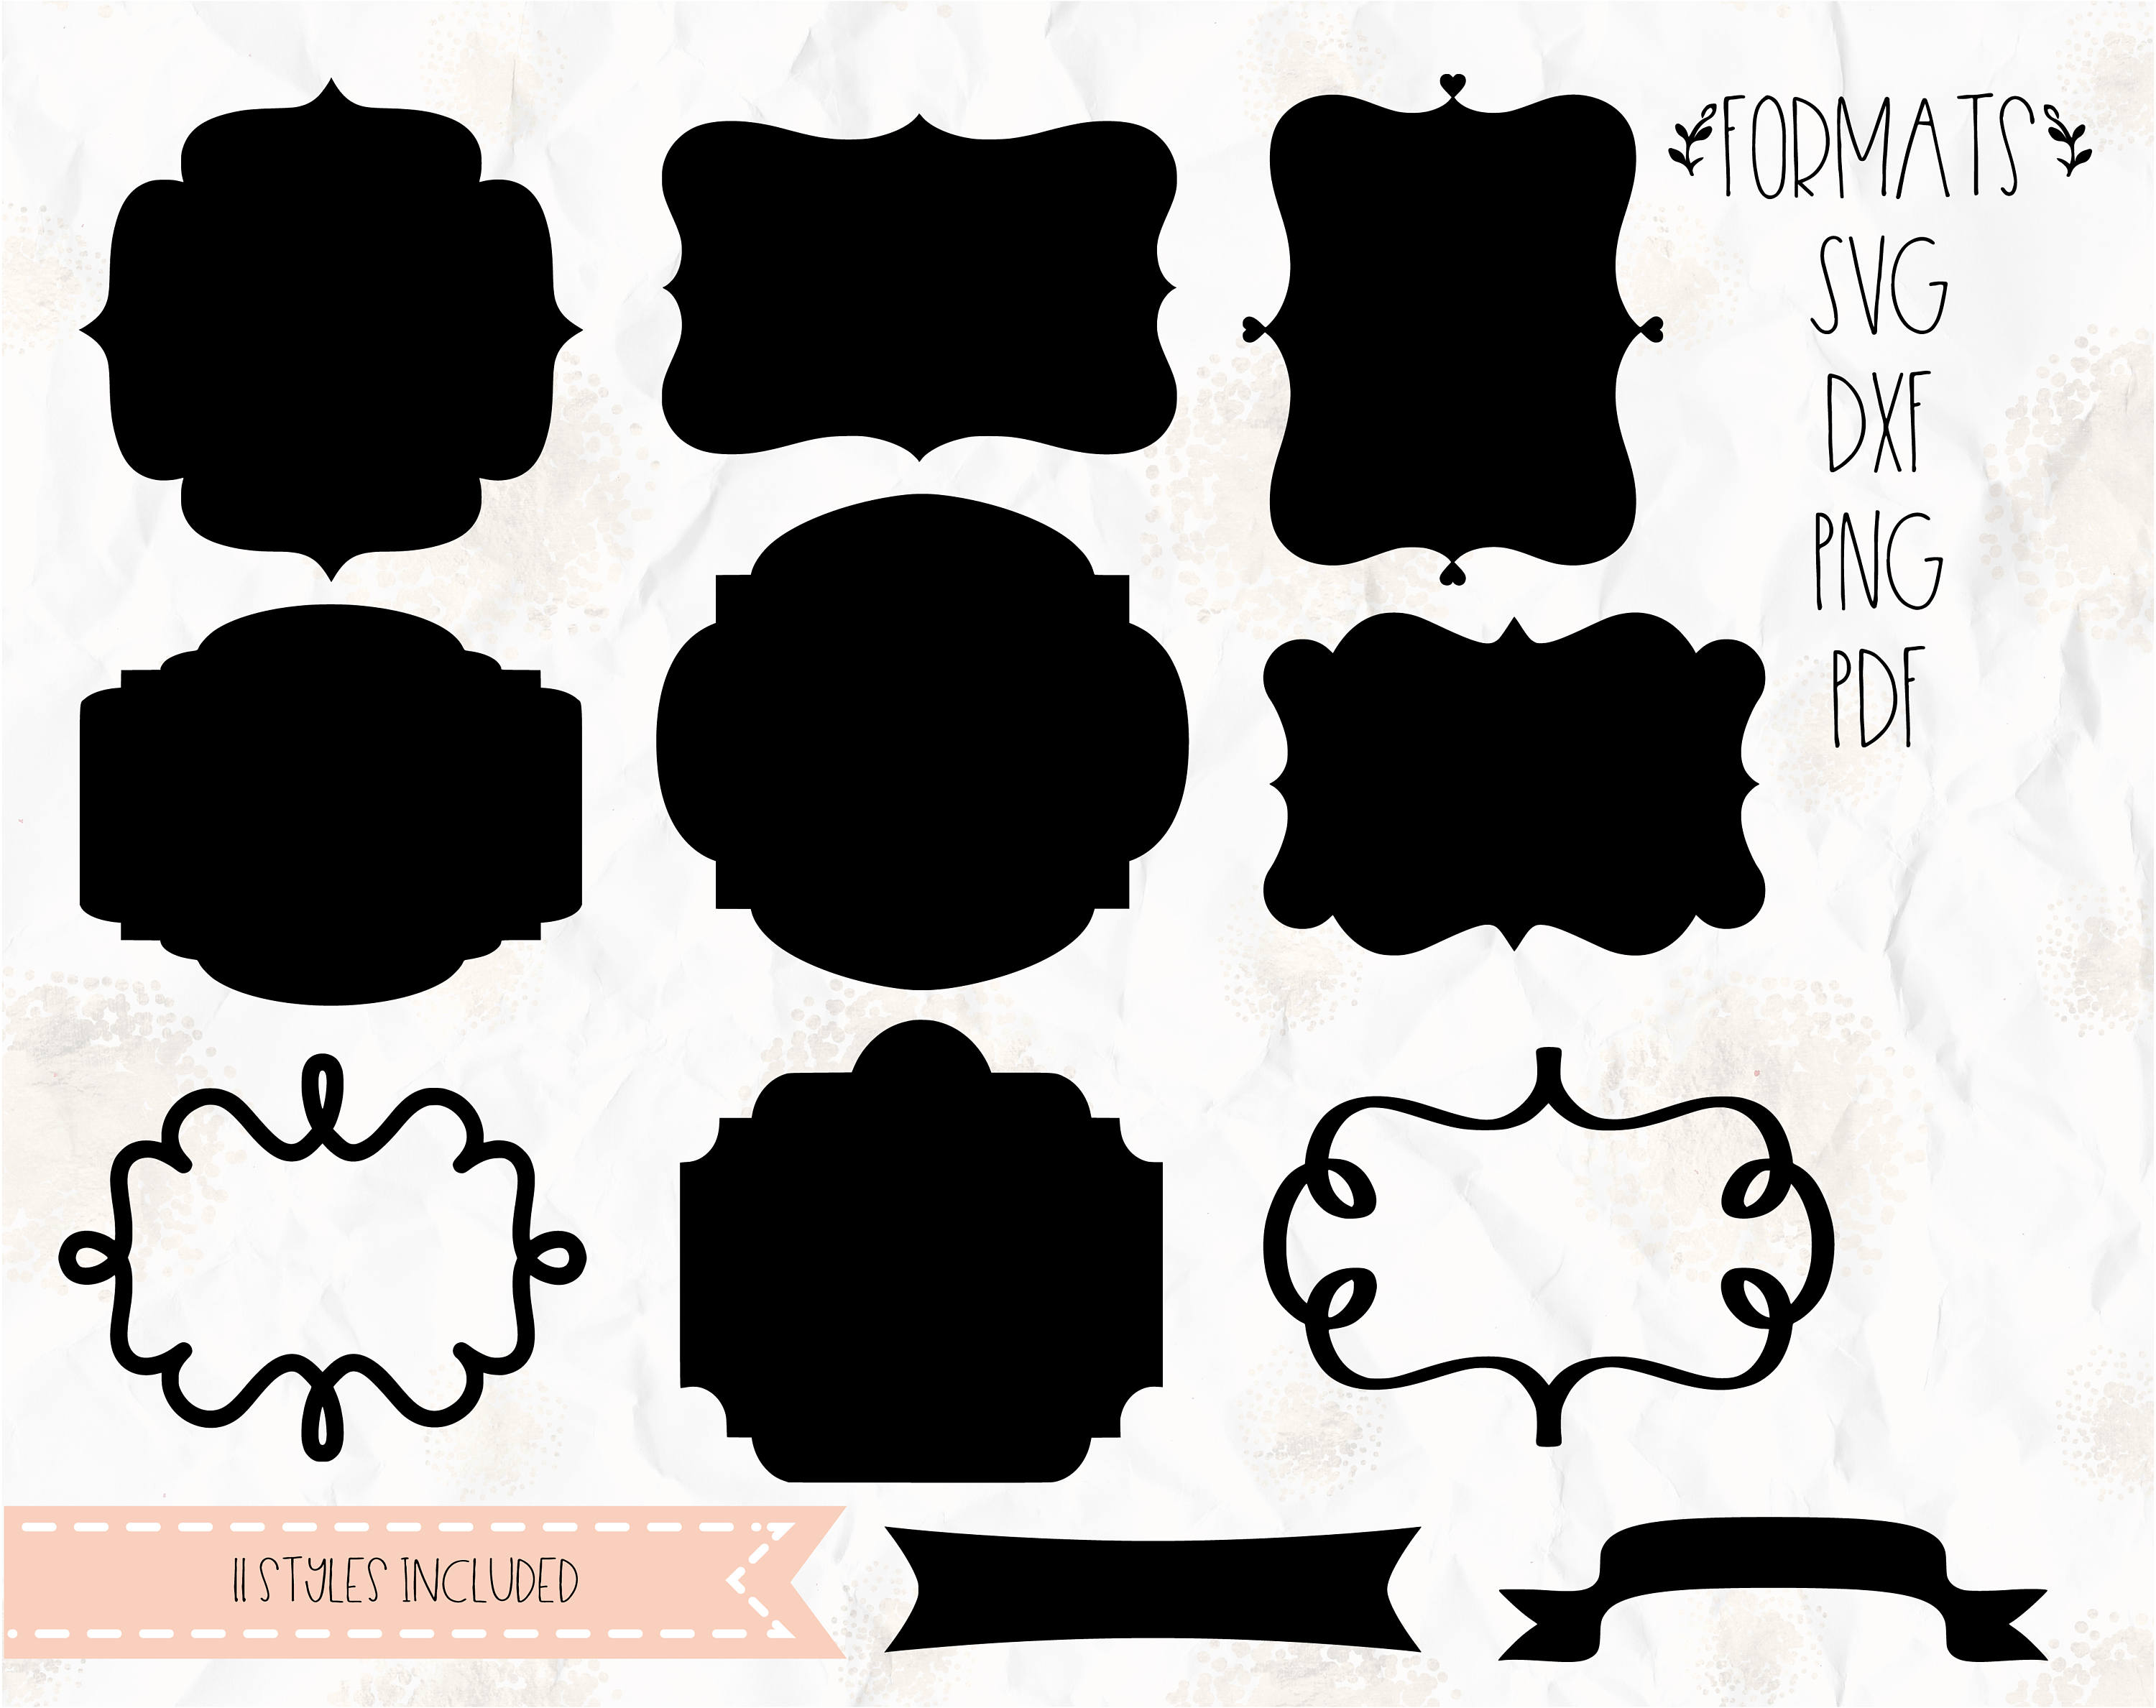 Download Frames, banners SVG, PNG, DXF, cricut, silhouette studio ...